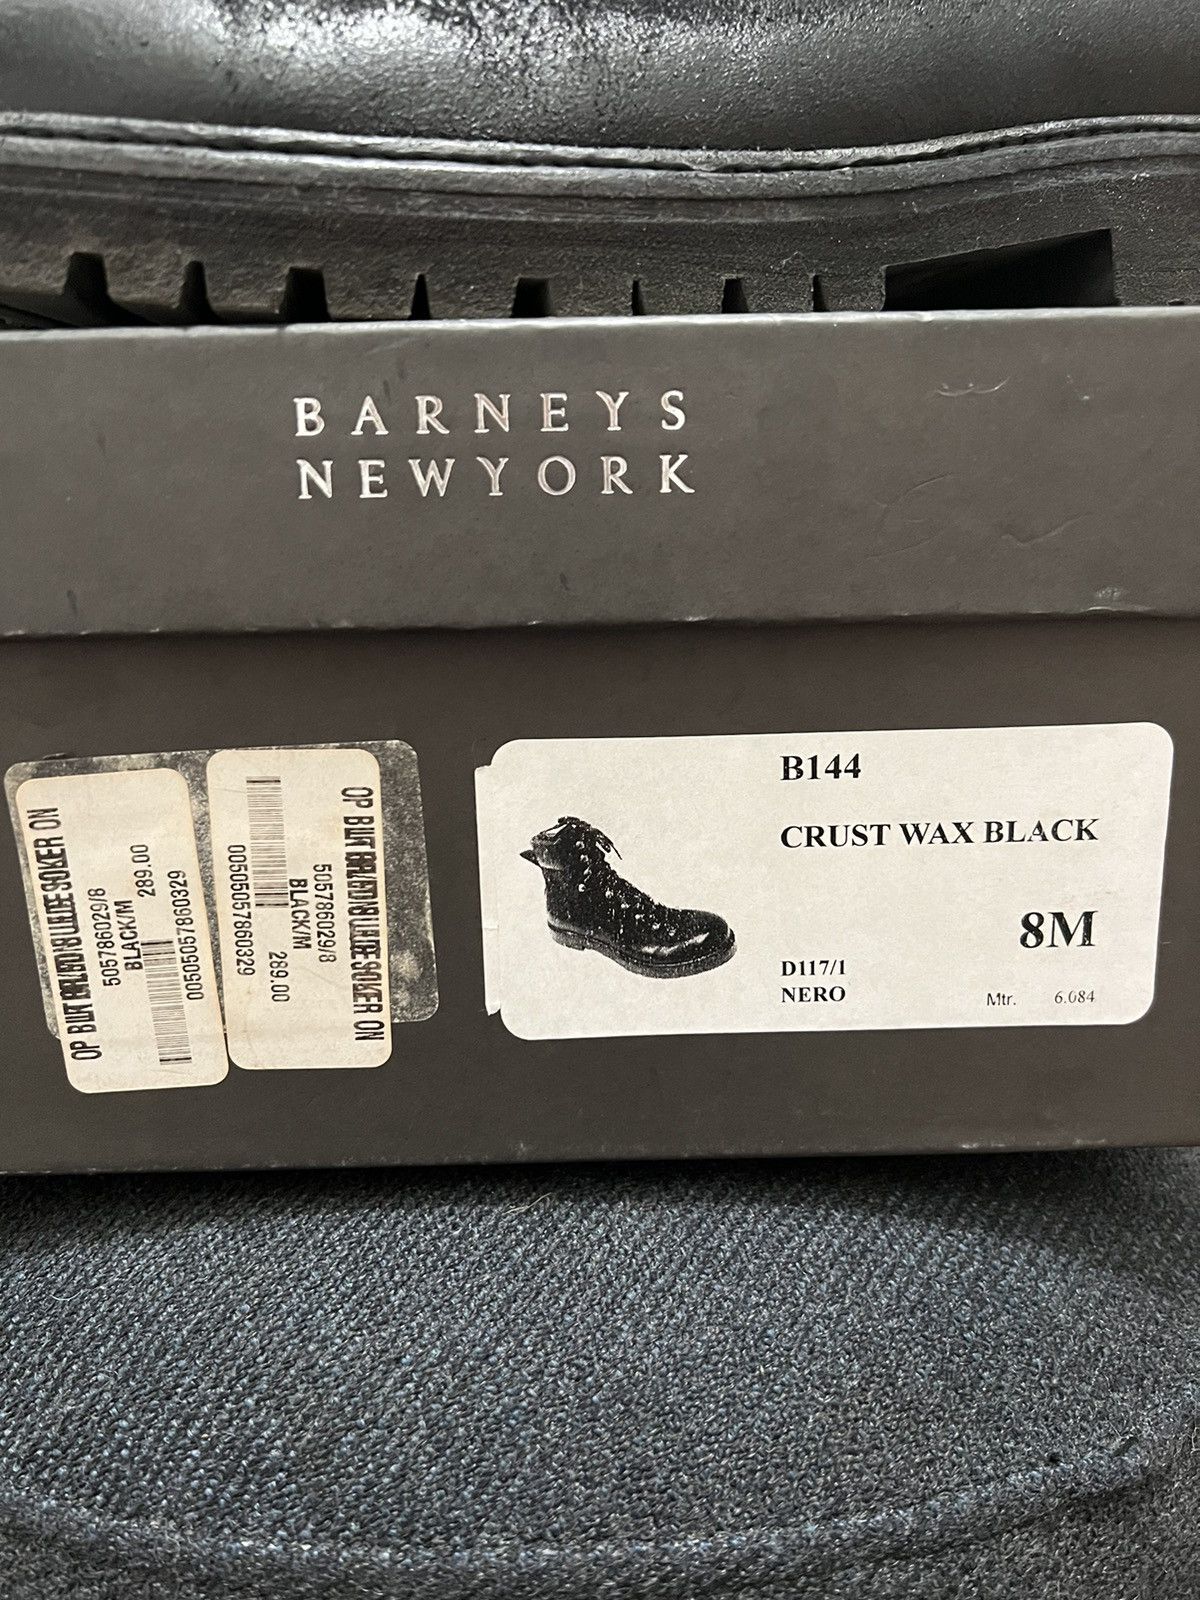 Barneys New York Vintage Barney’s New York Boots Size US 9.5 / EU 42-43 - 8 Preview